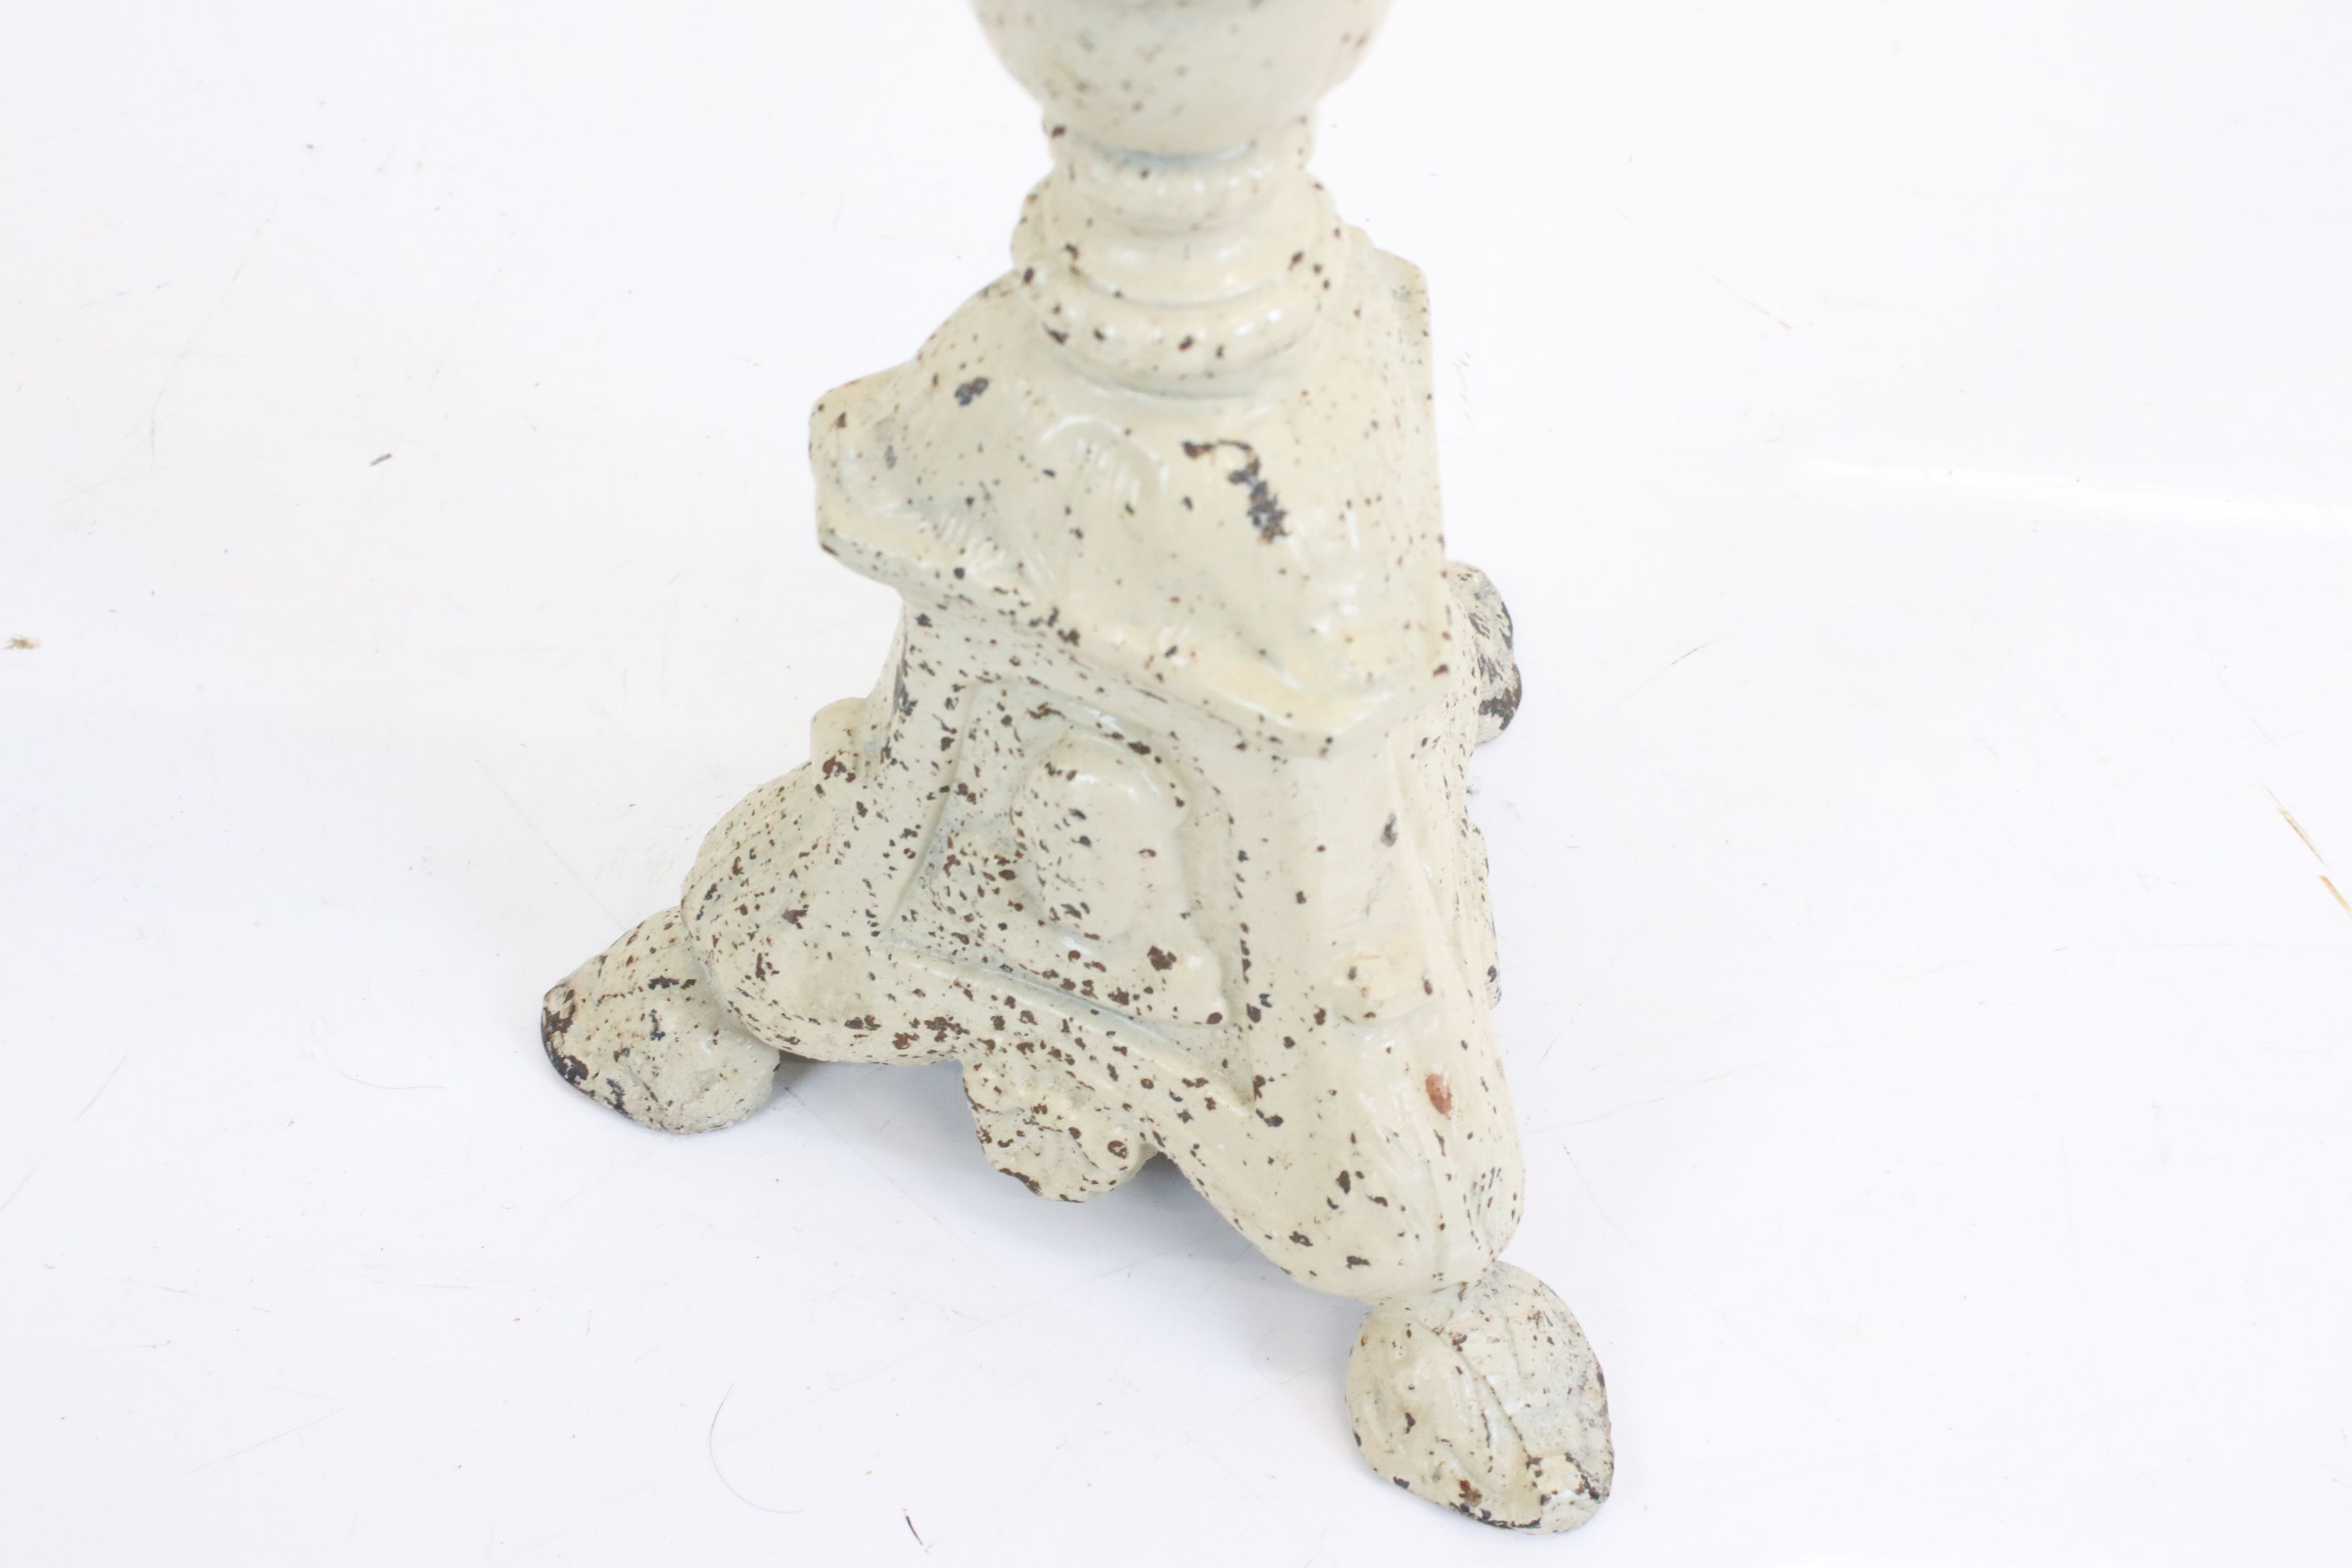 Cast Iron Painted Tall Candlestick / Prick, 70cm high - Image 2 of 3